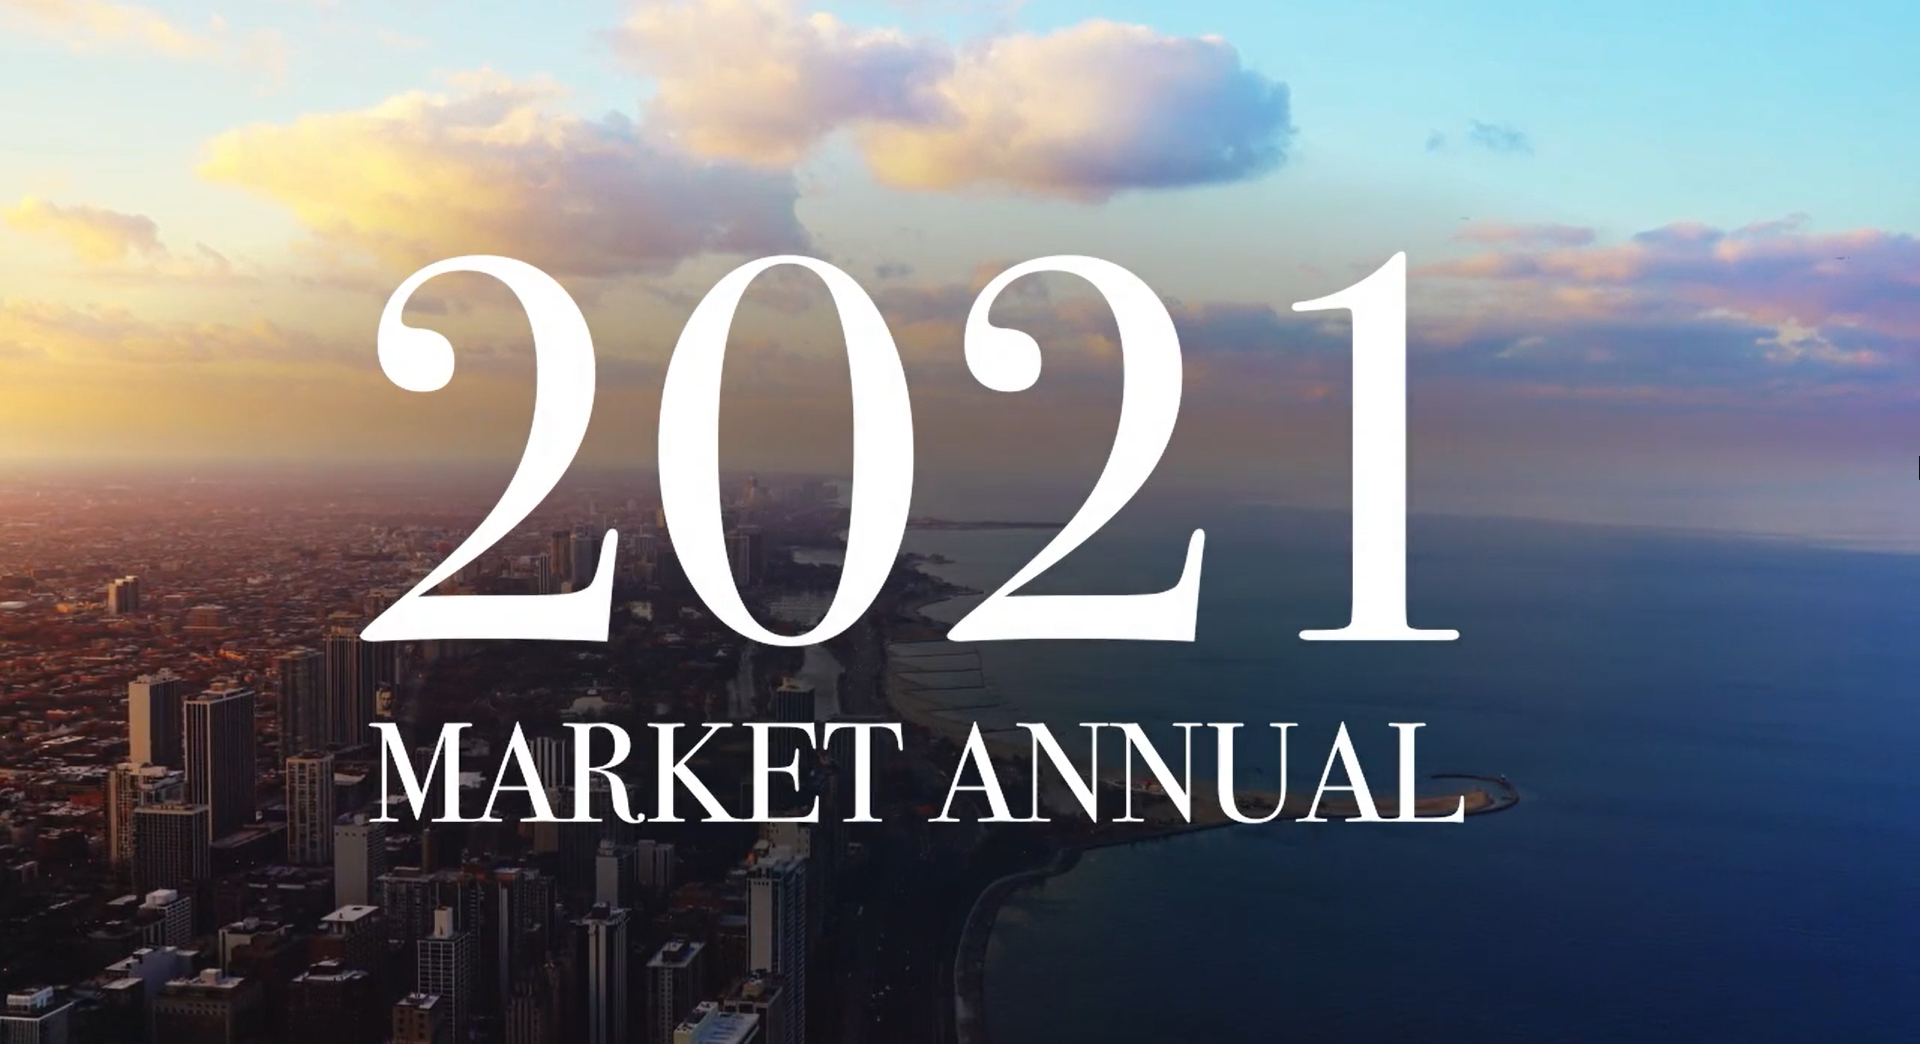  Annual Market Review 2021